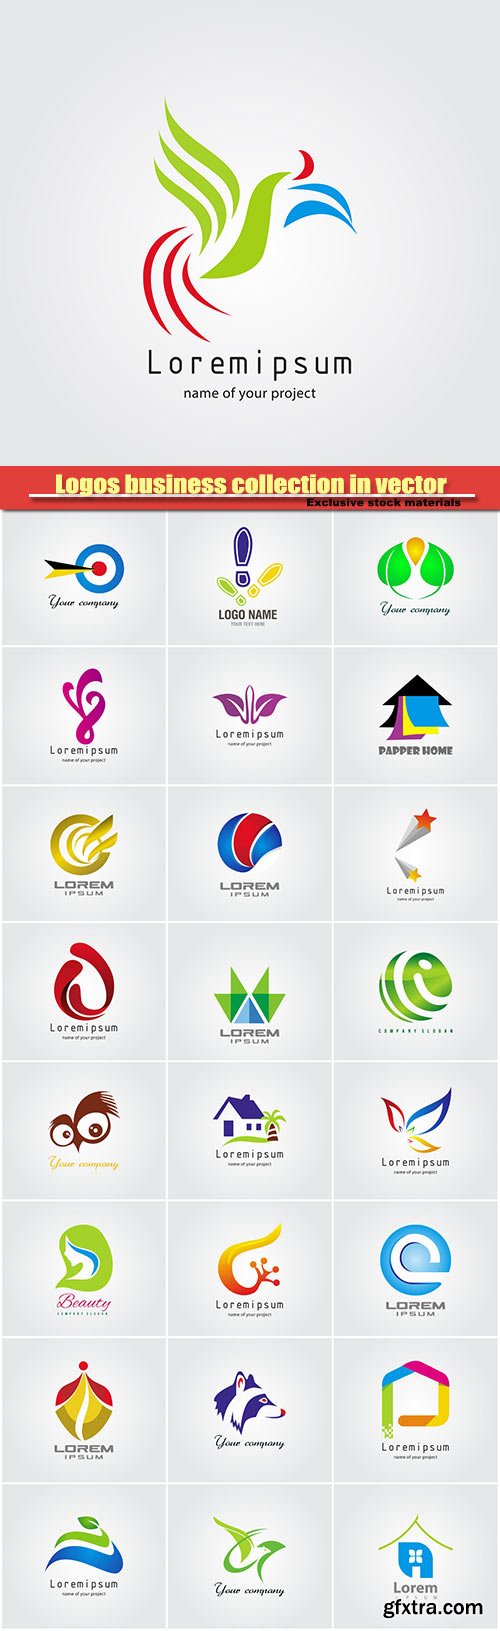 Logos business collection in vector